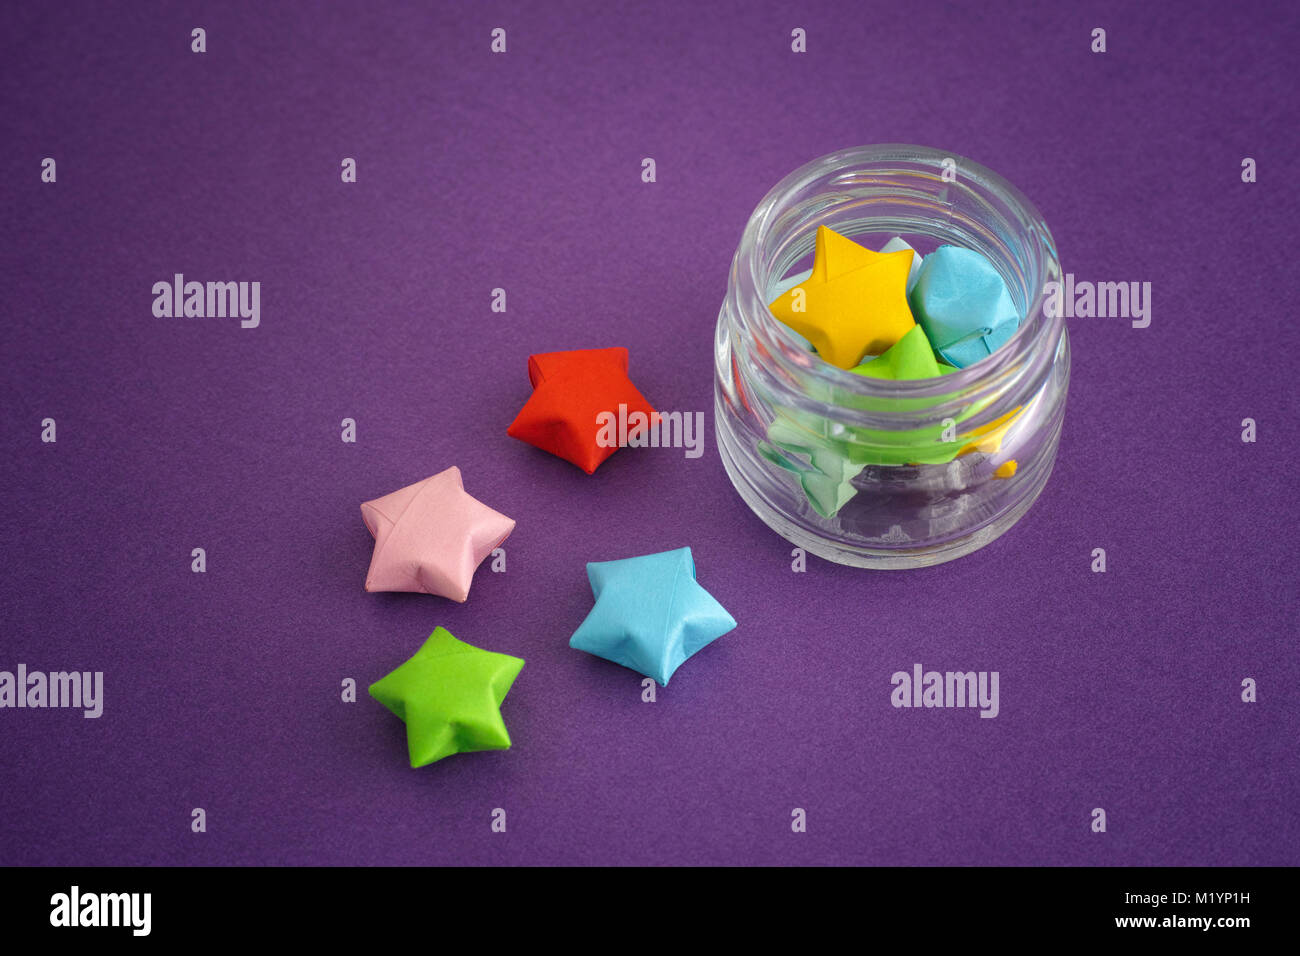 Colorful origami lucky stars spilling out of a jar. Purple background. Stock Photo